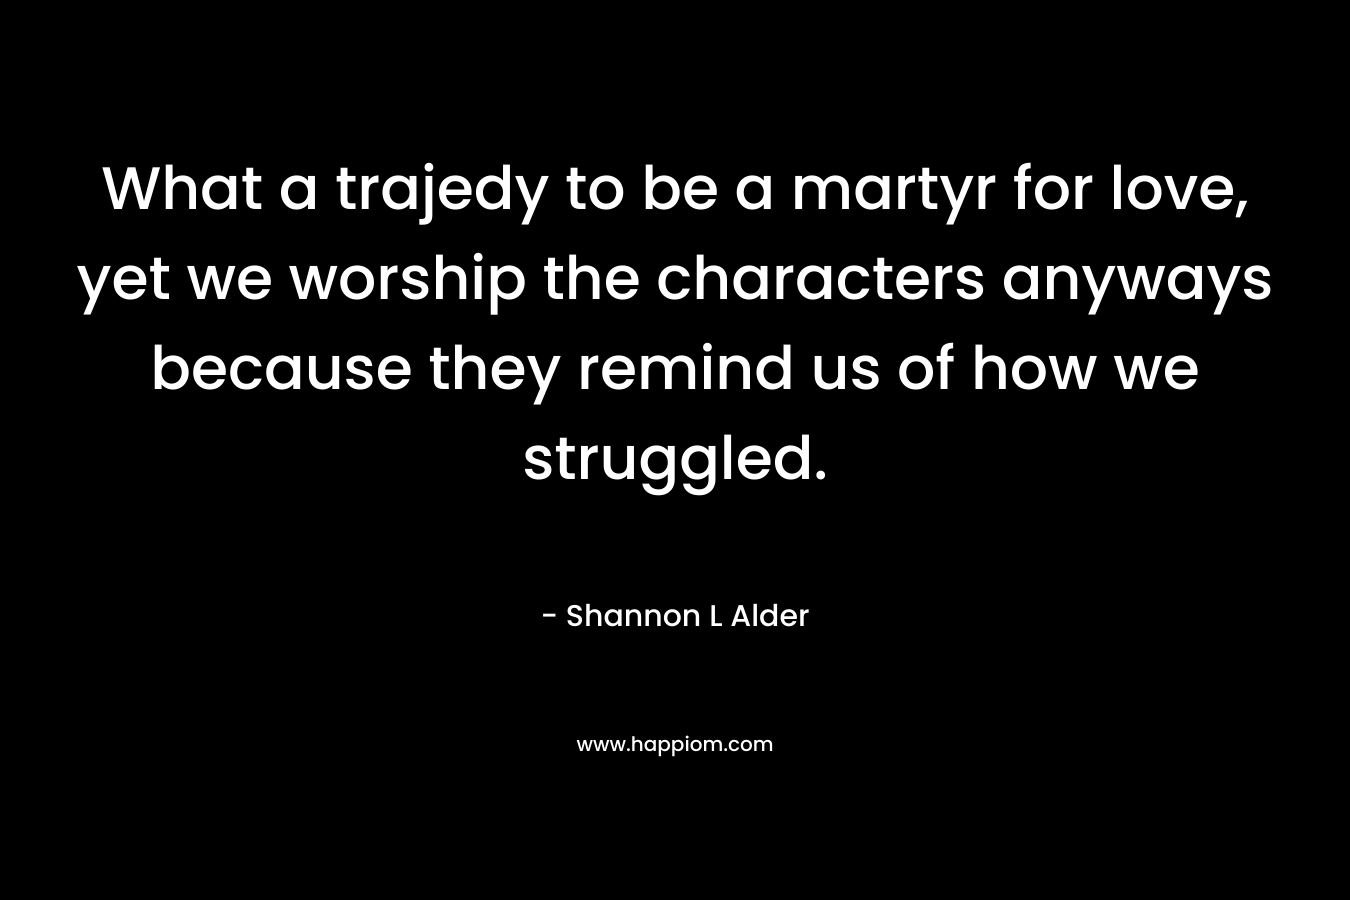 What a trajedy to be a martyr for love, yet we worship the characters anyways because they remind us of how we struggled.